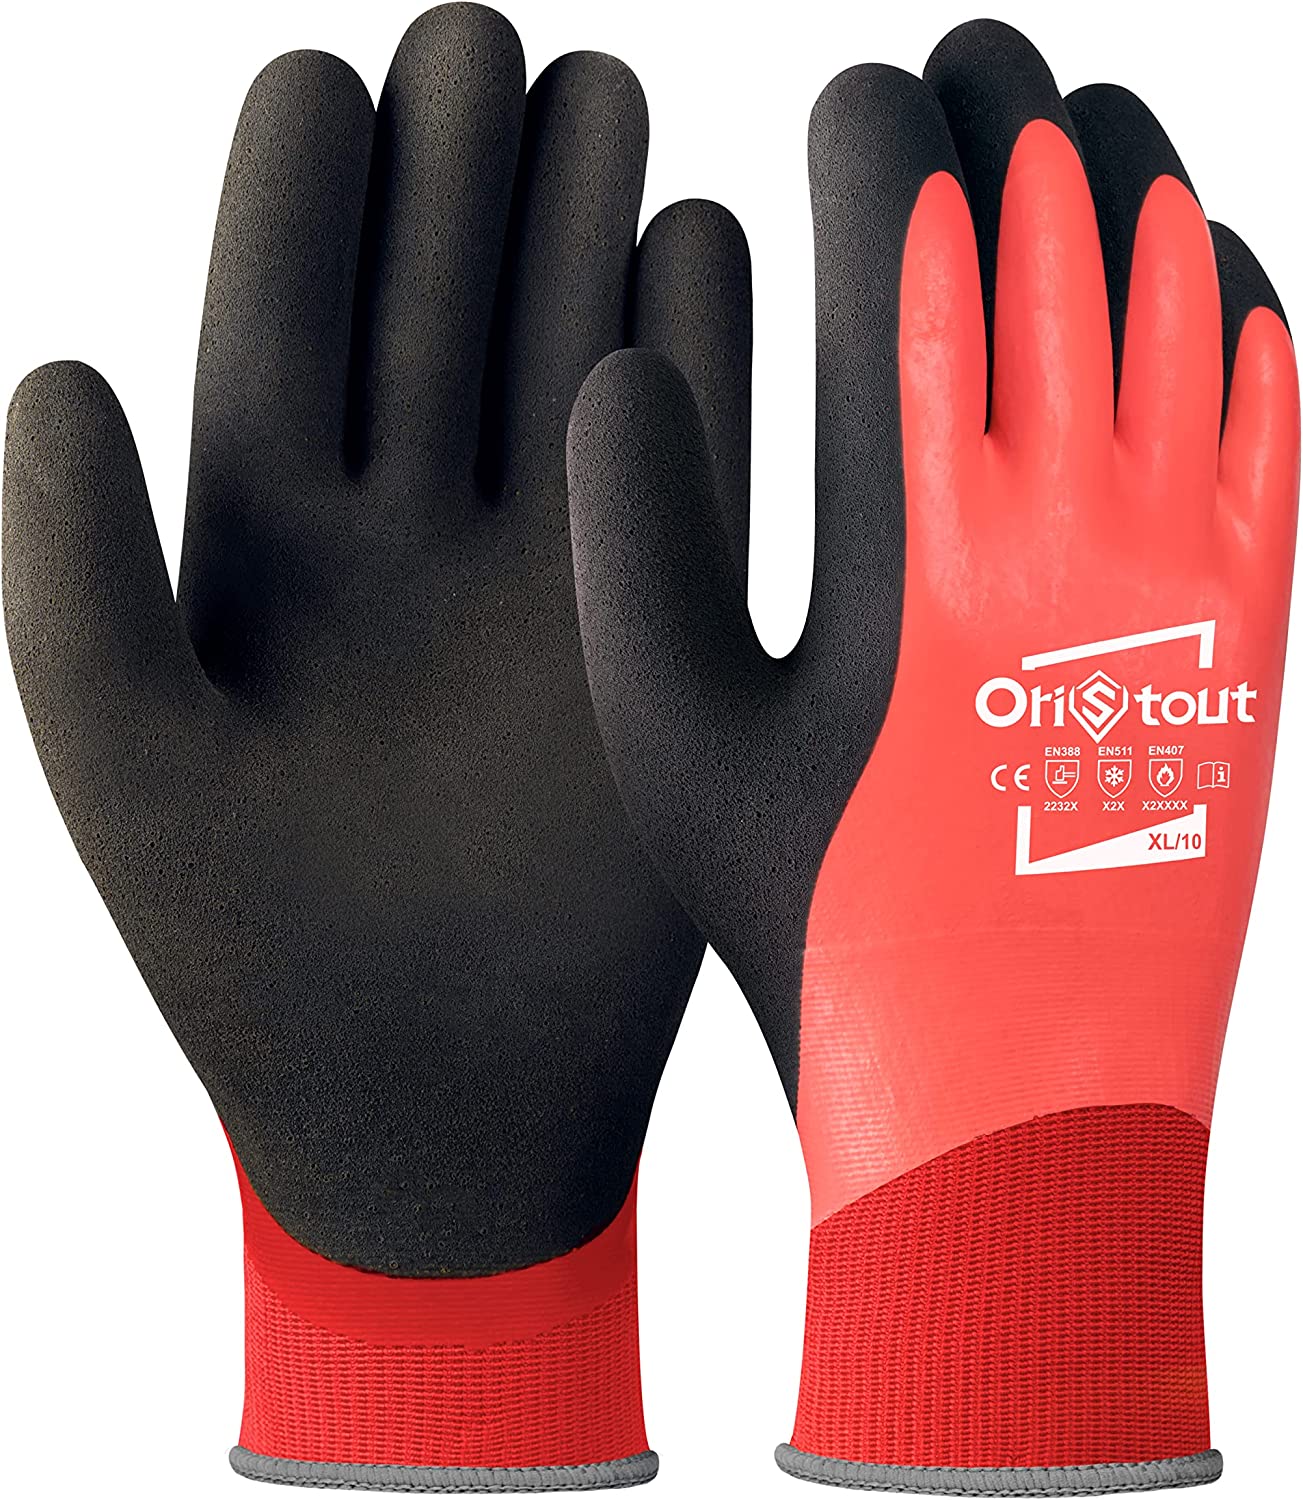 Waterproof Winter Gloves, Touchscreen, Freezer Gloves, Thermal Insulated  Fishing Gloves